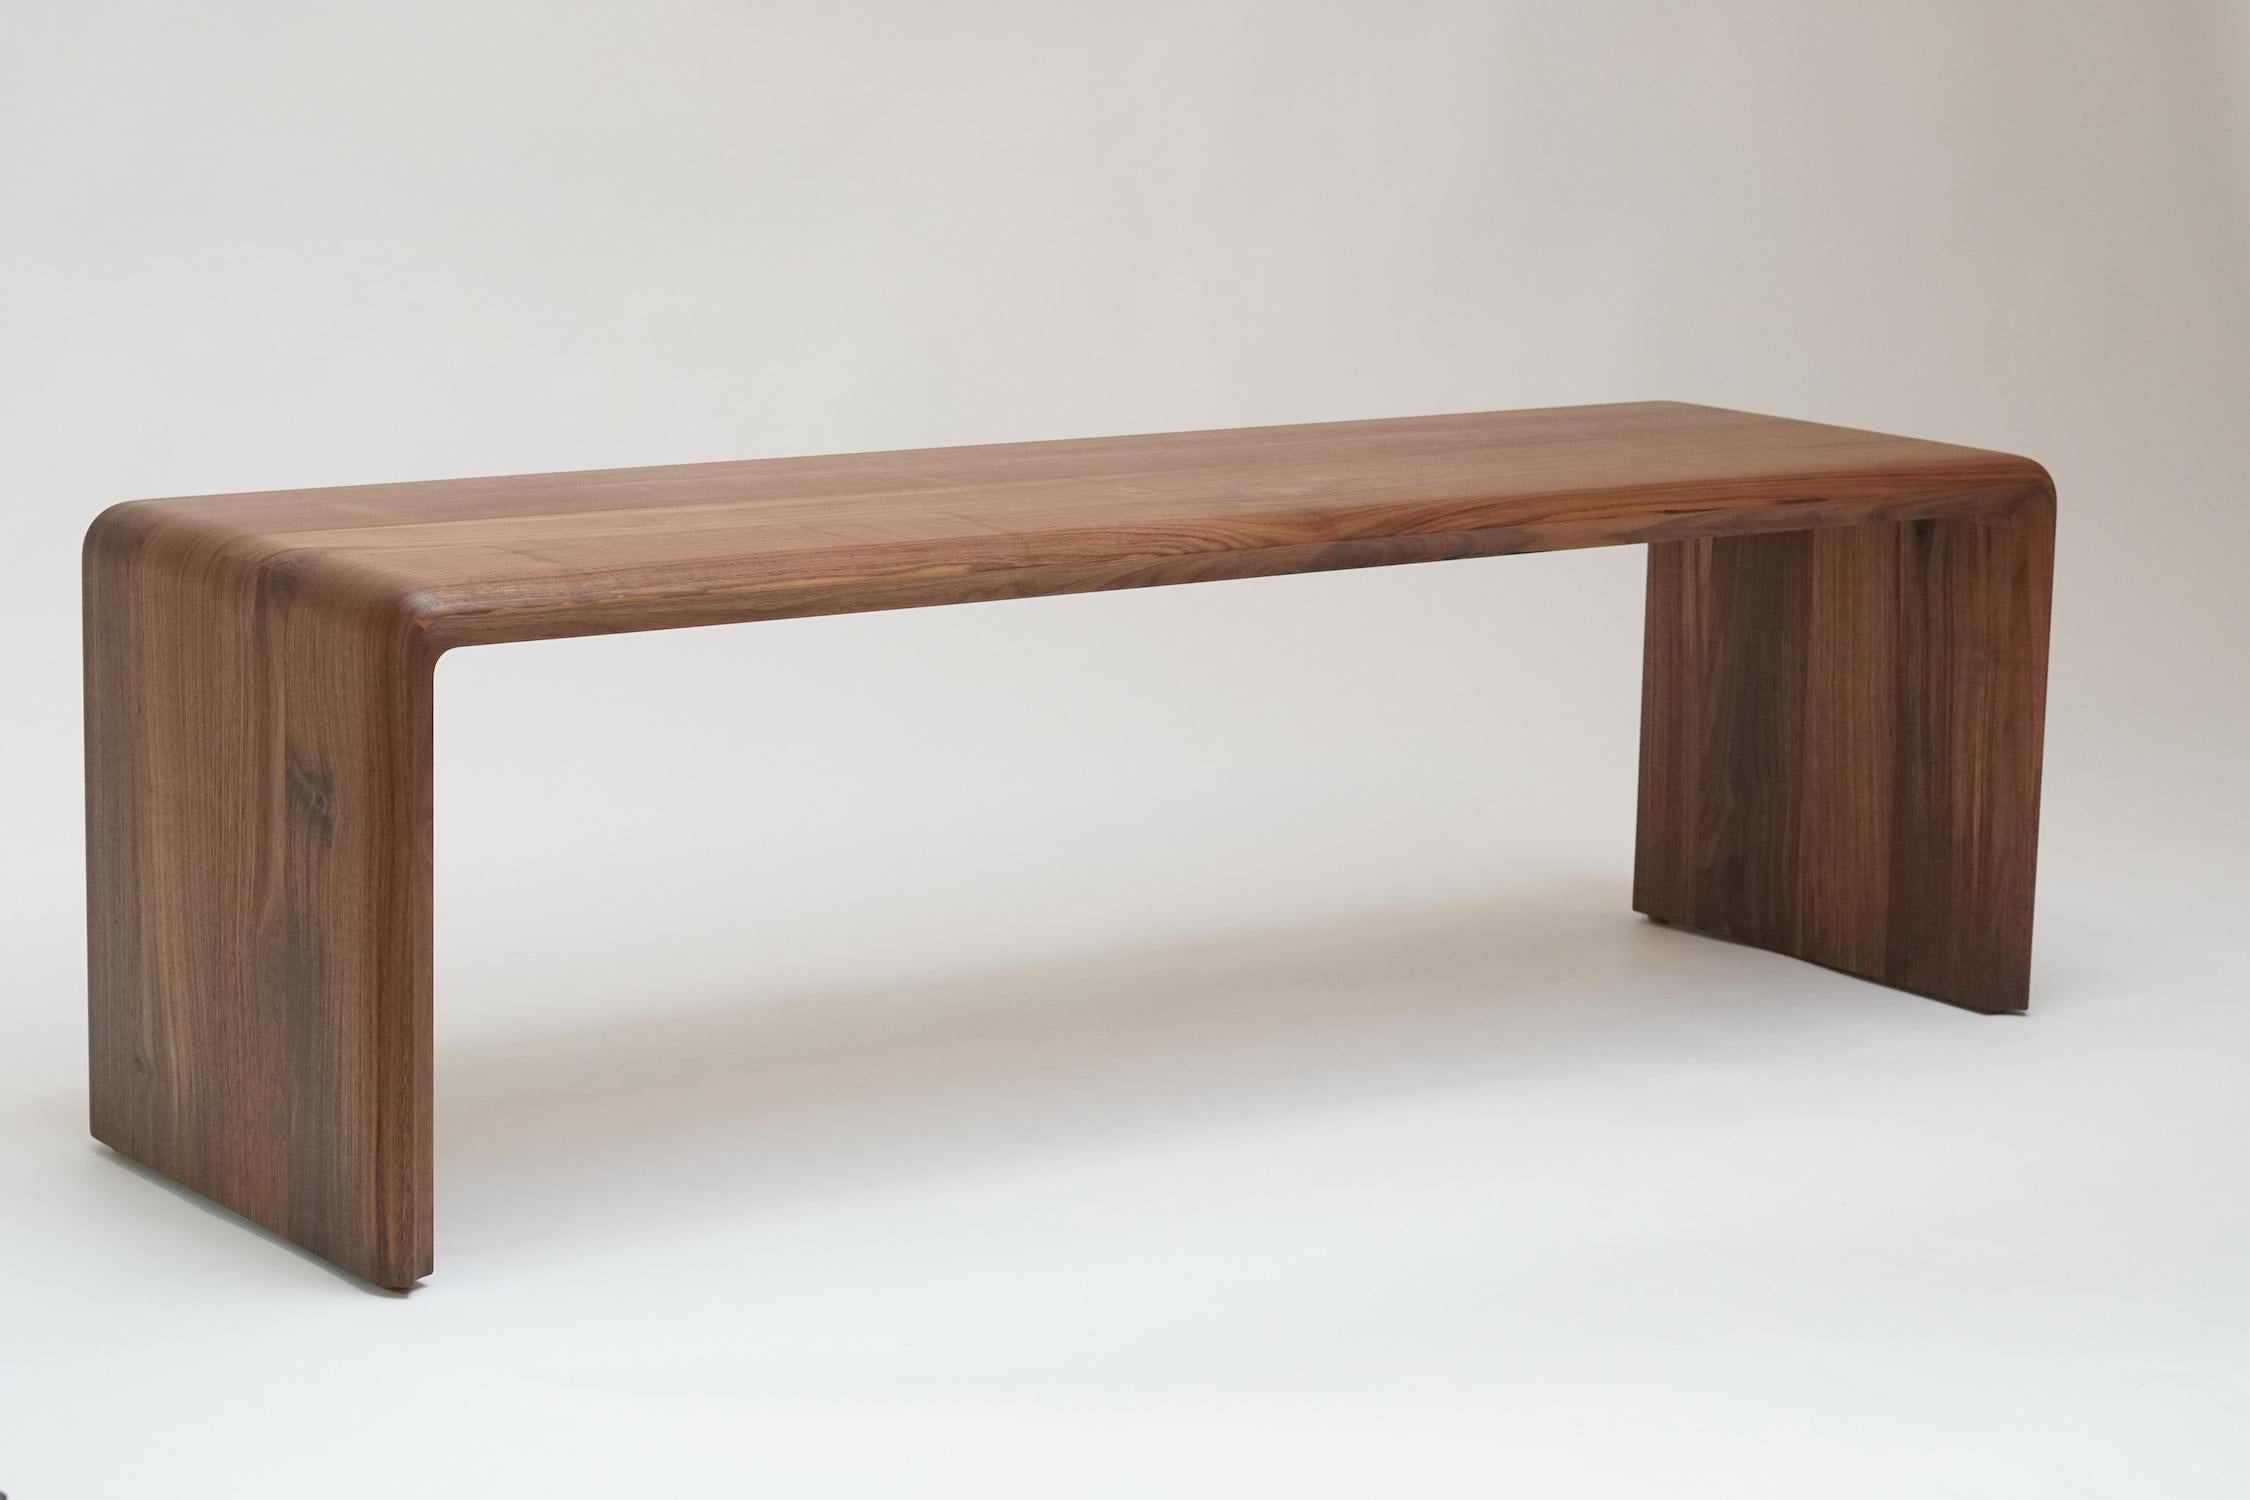 Radiused outer edges and scalloped inner edge create a contrasting profile that adorns this minimal bench. Made from hand oiled solid walnut, this bench blends simple lines with unique subtle details.

Available in walnut, ash, reclaimed southern